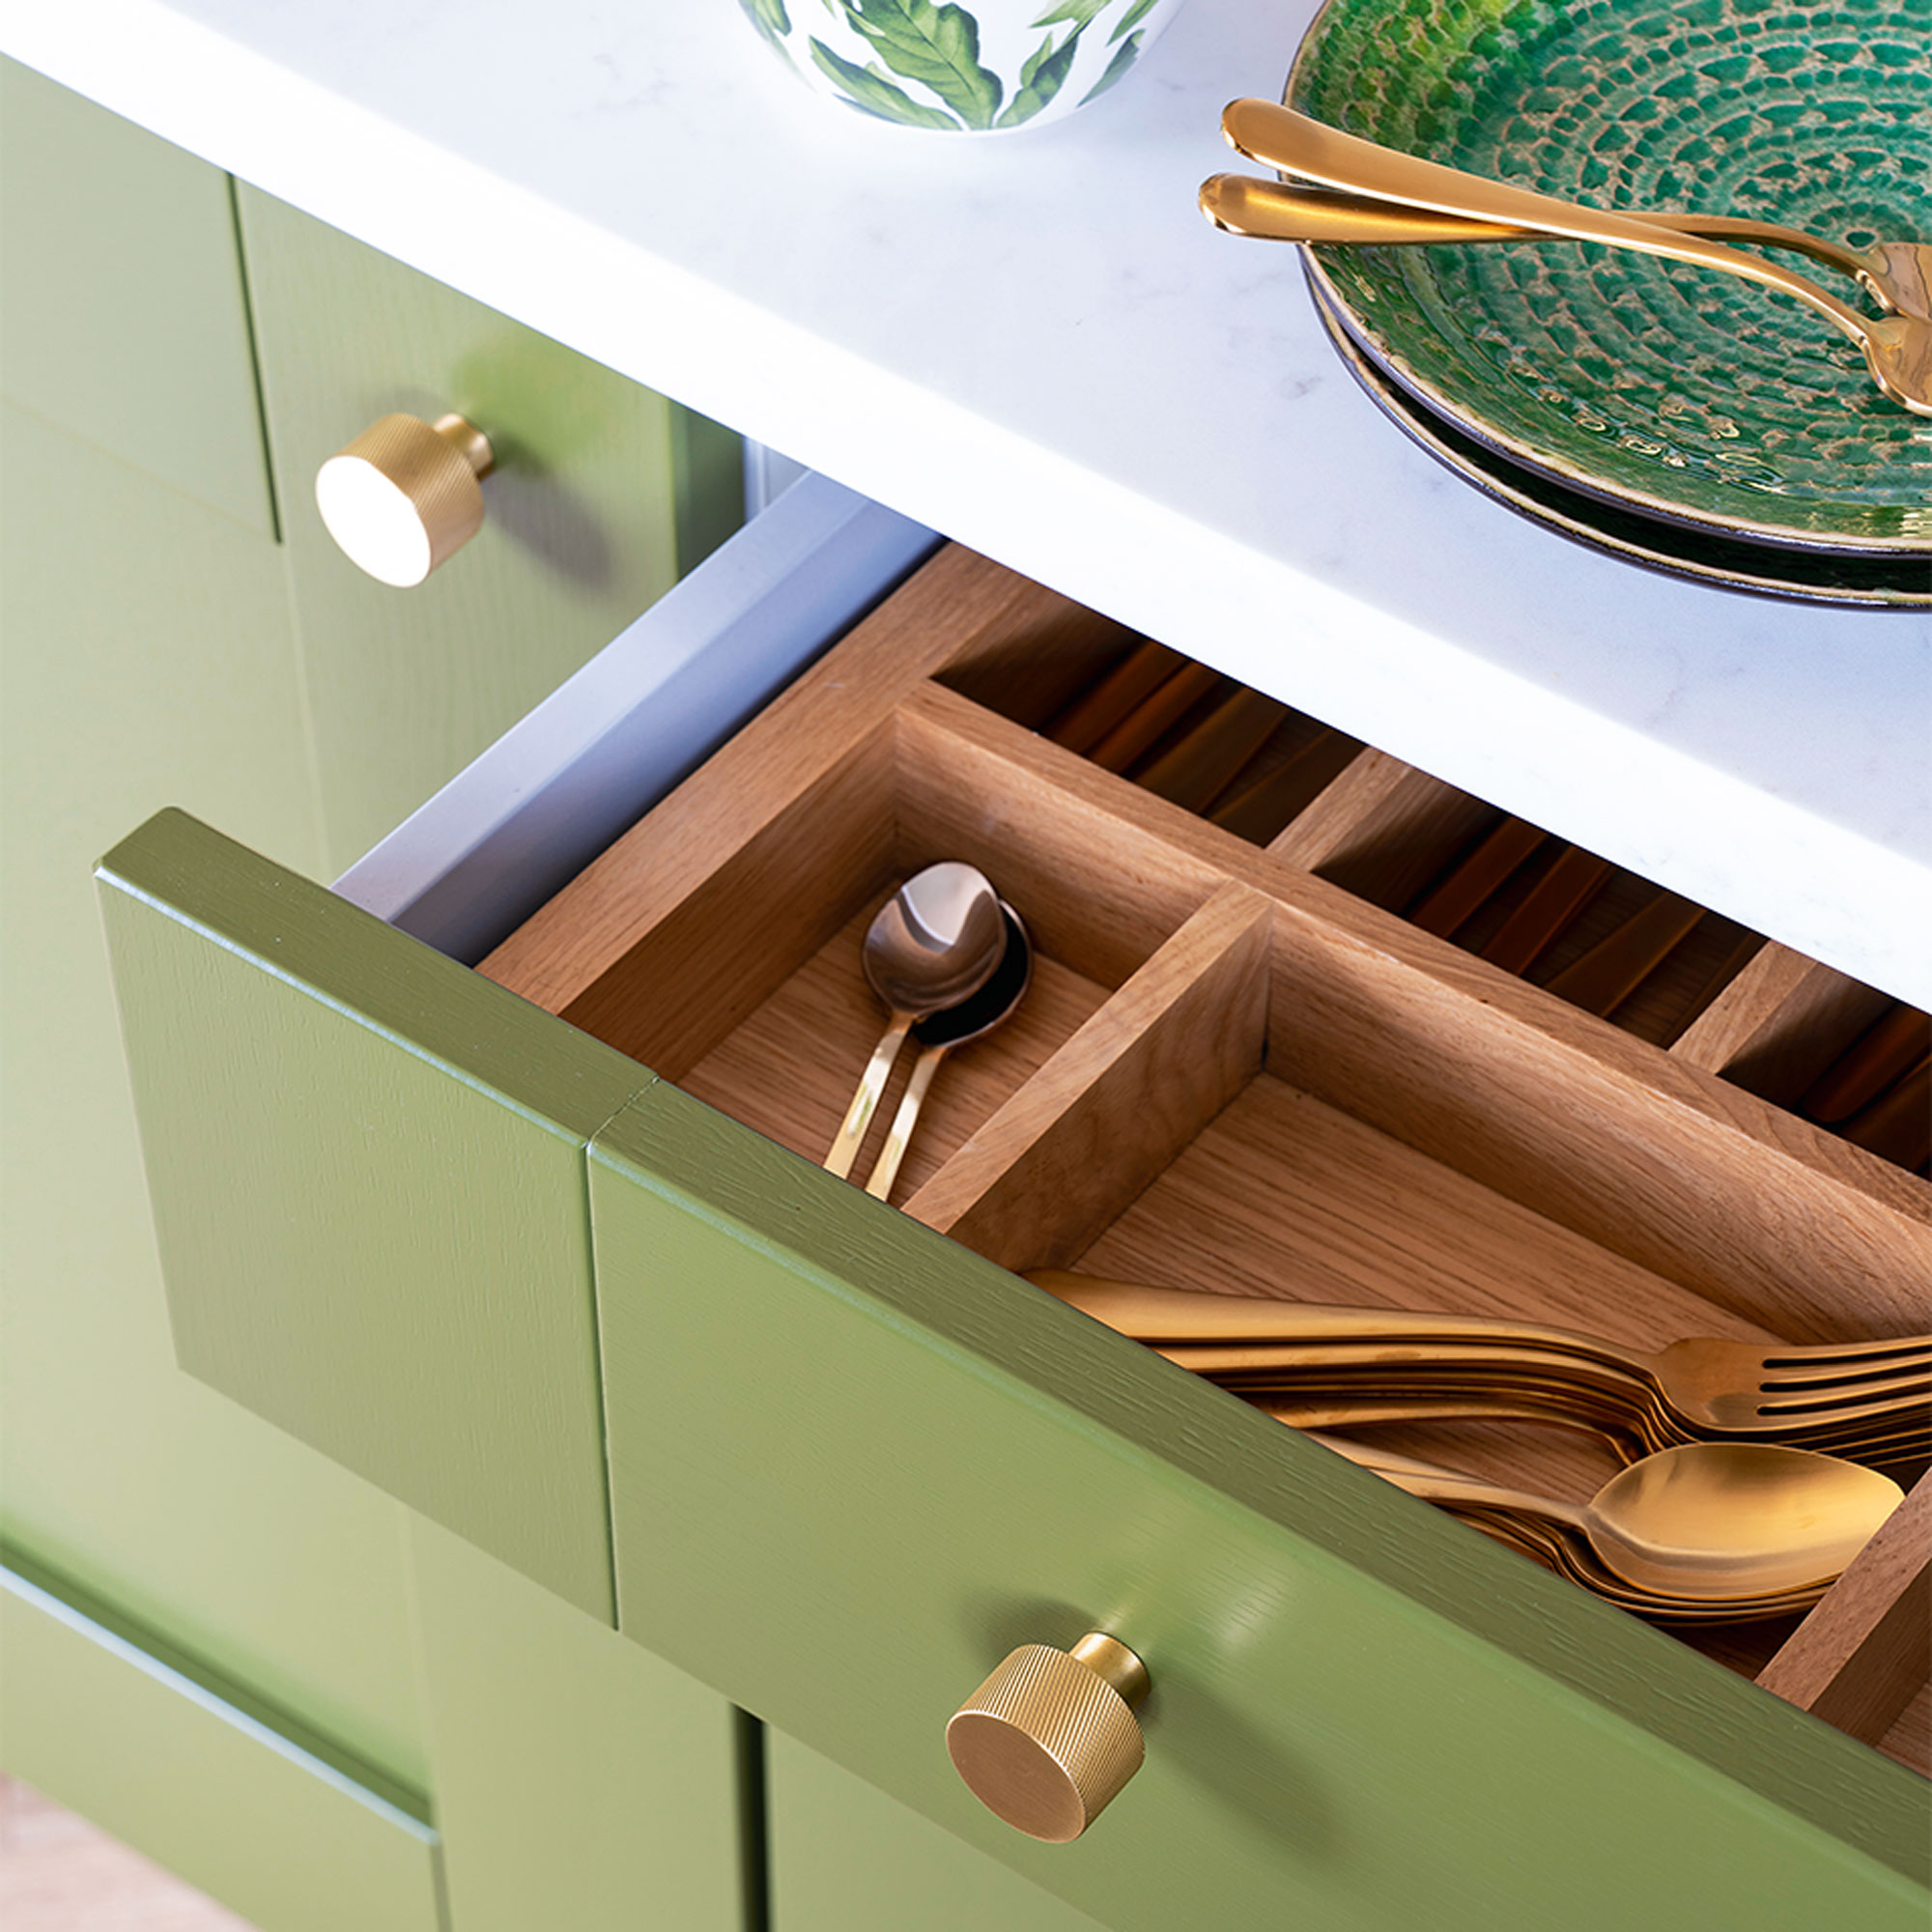 Green kitchen with wooden cutlery drawer